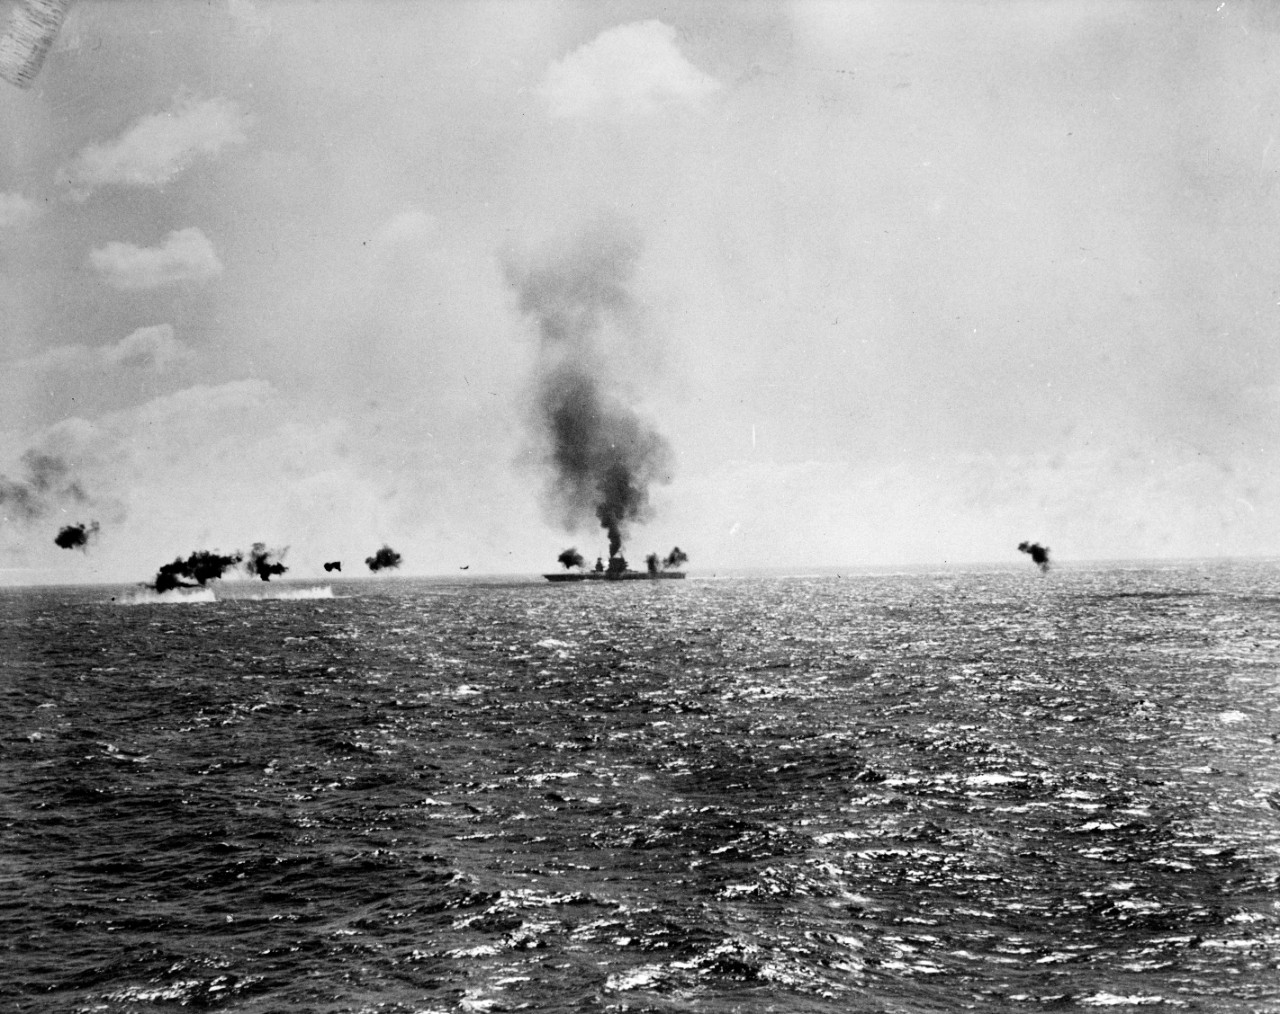 Photo #: 80-G-7414  Battle of the Coral Sea, May 1942